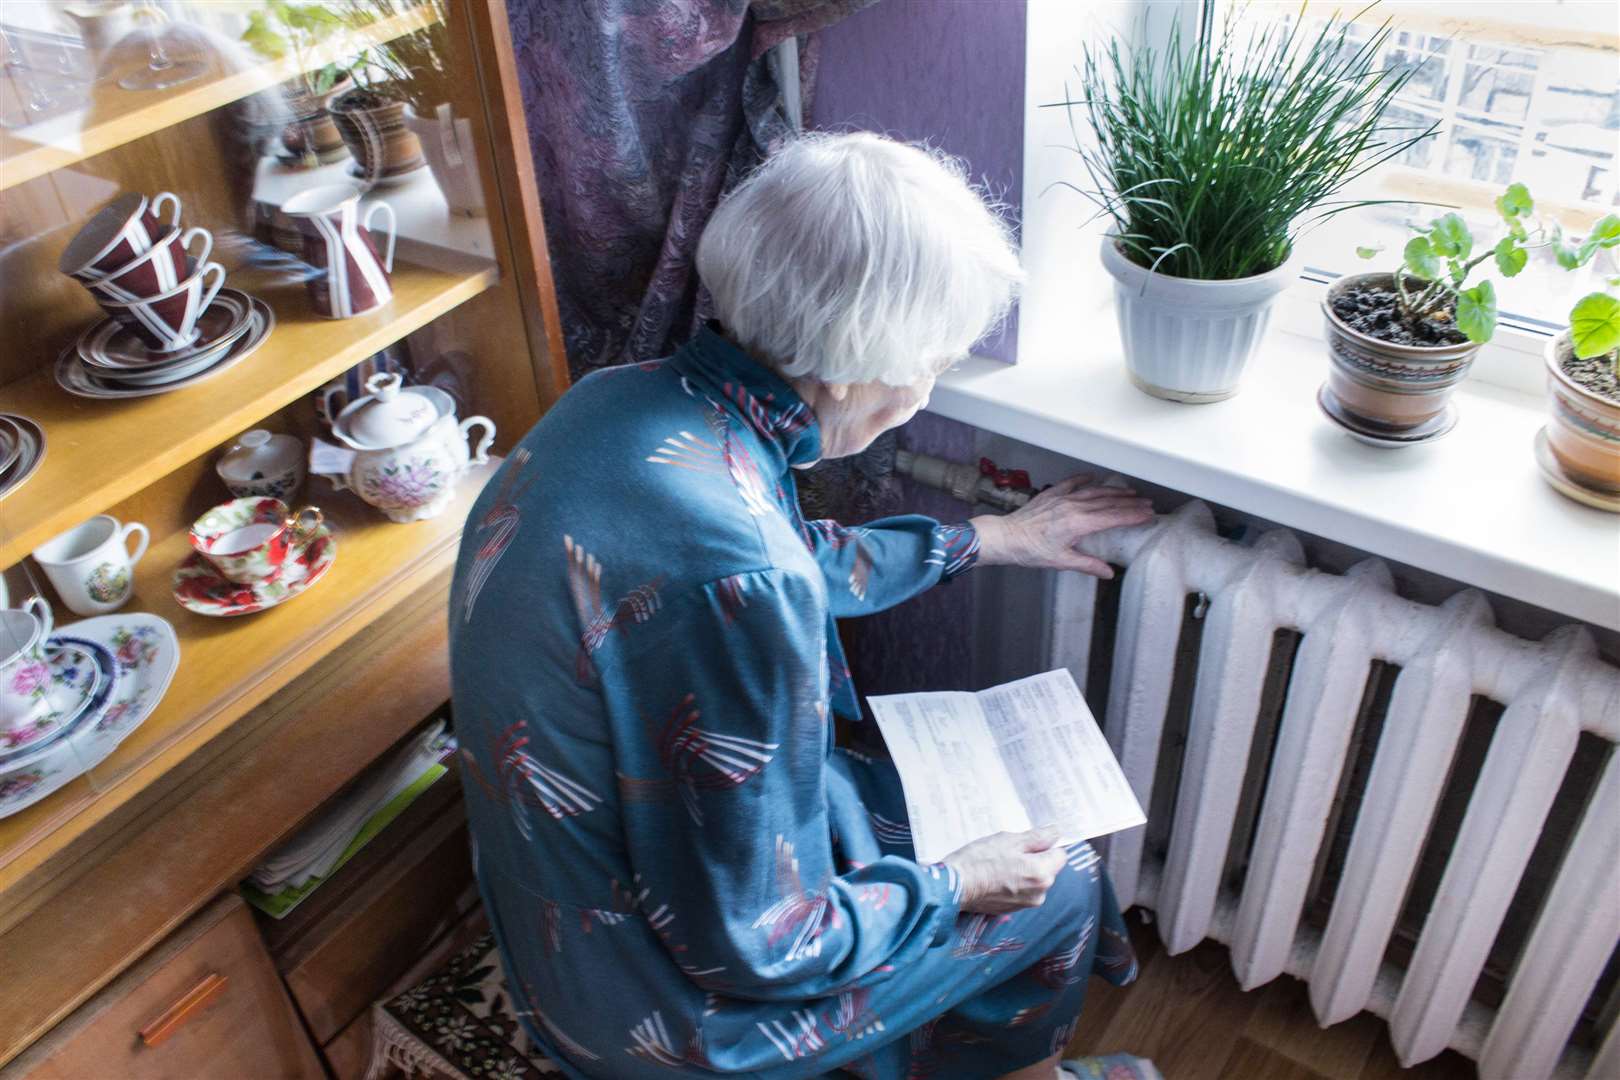 Pensioners often use more energy because they are at home more. Image: Stock photo.